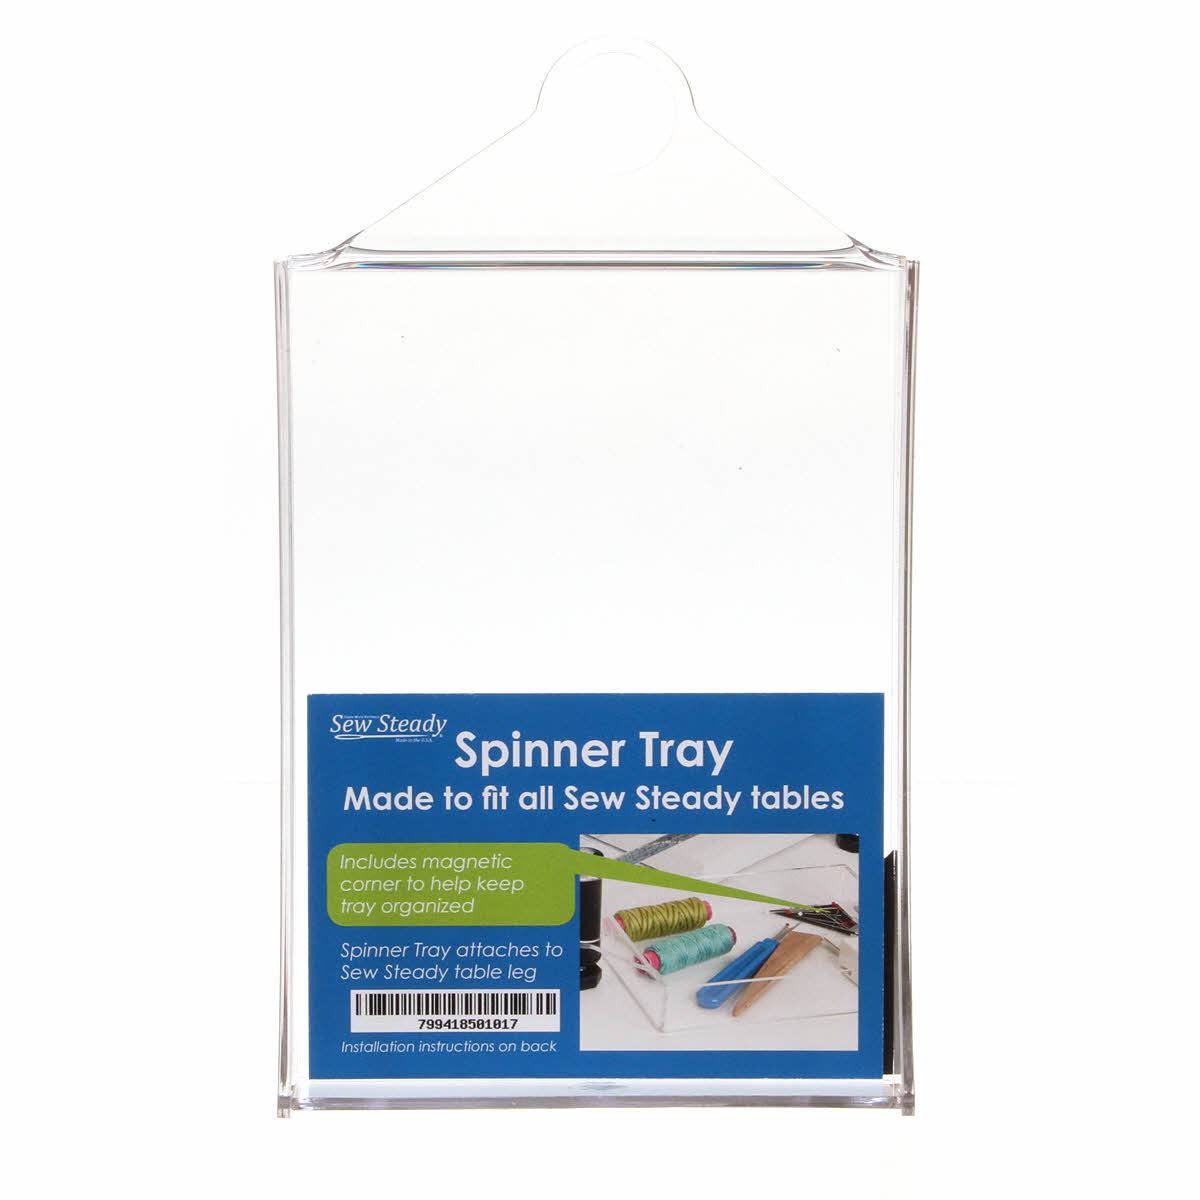 Sew Steady Spinner Tray - 6in x 8in image # 42679